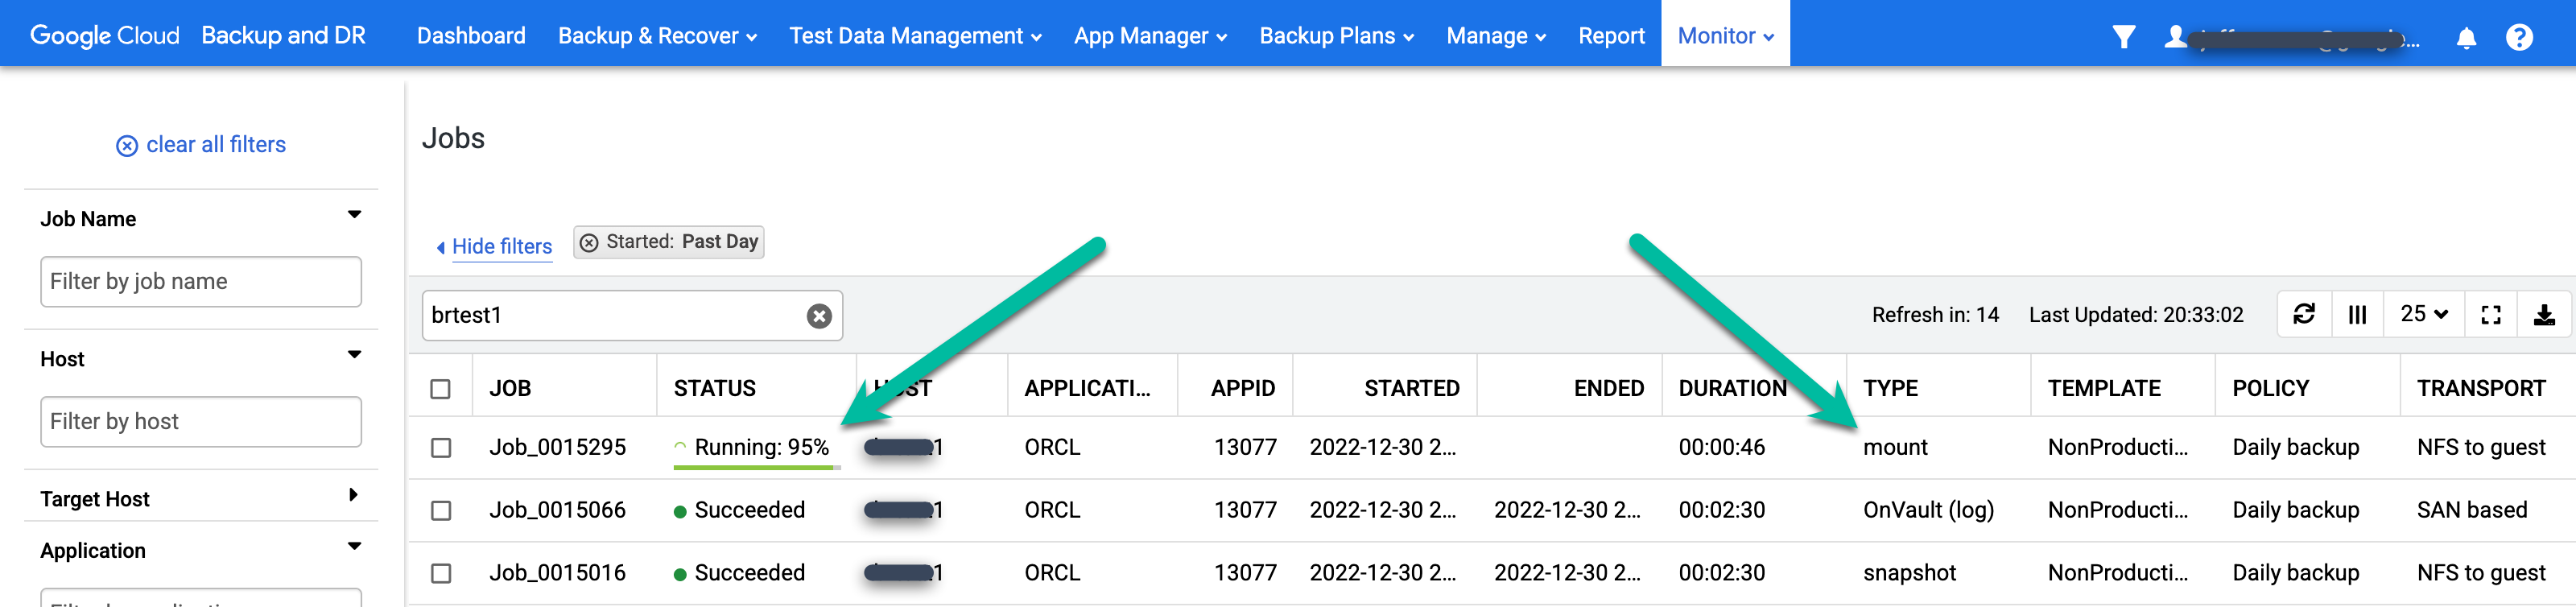 Backup and DR management console page that shows the Monitor > Jobs page.